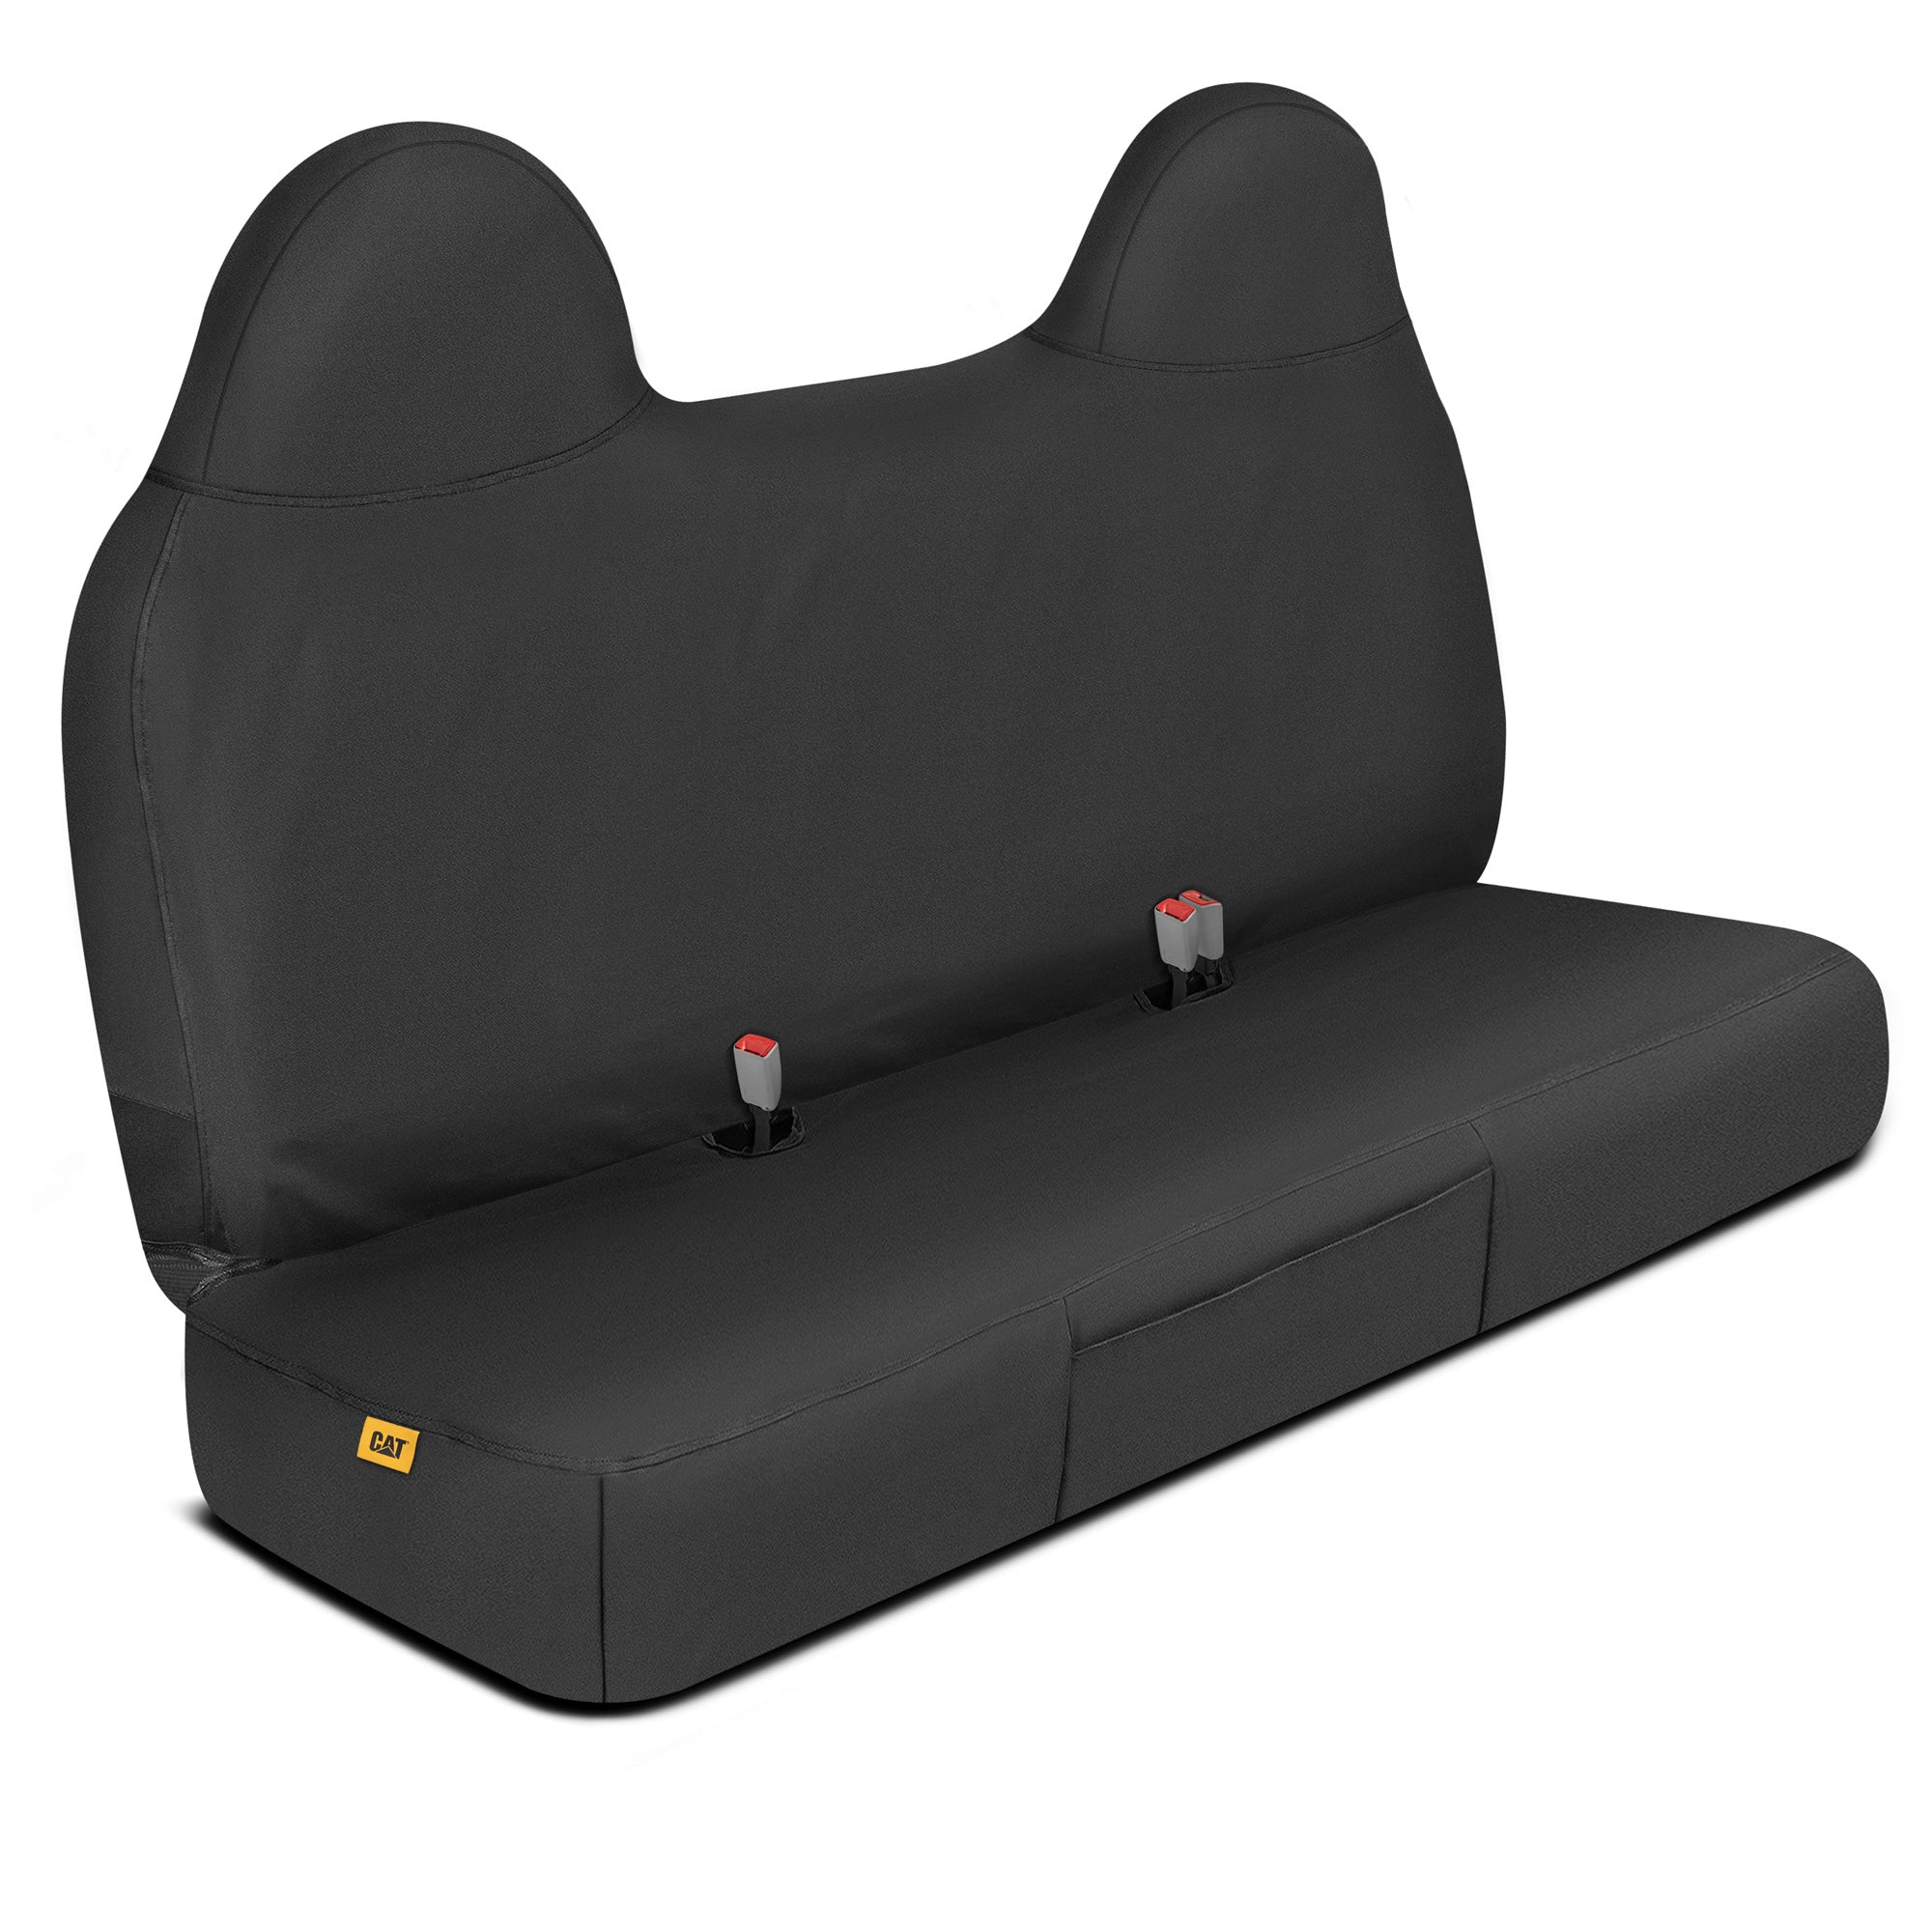 Cat® Custom Fit Front Bench Seat Cover for Ford F250 / F350 / F450 / F550 (1999-2007) - Durable Black Oxford Truck Seat Cover with Utility Pockets, Ford F250 Super Duty Interior Cover